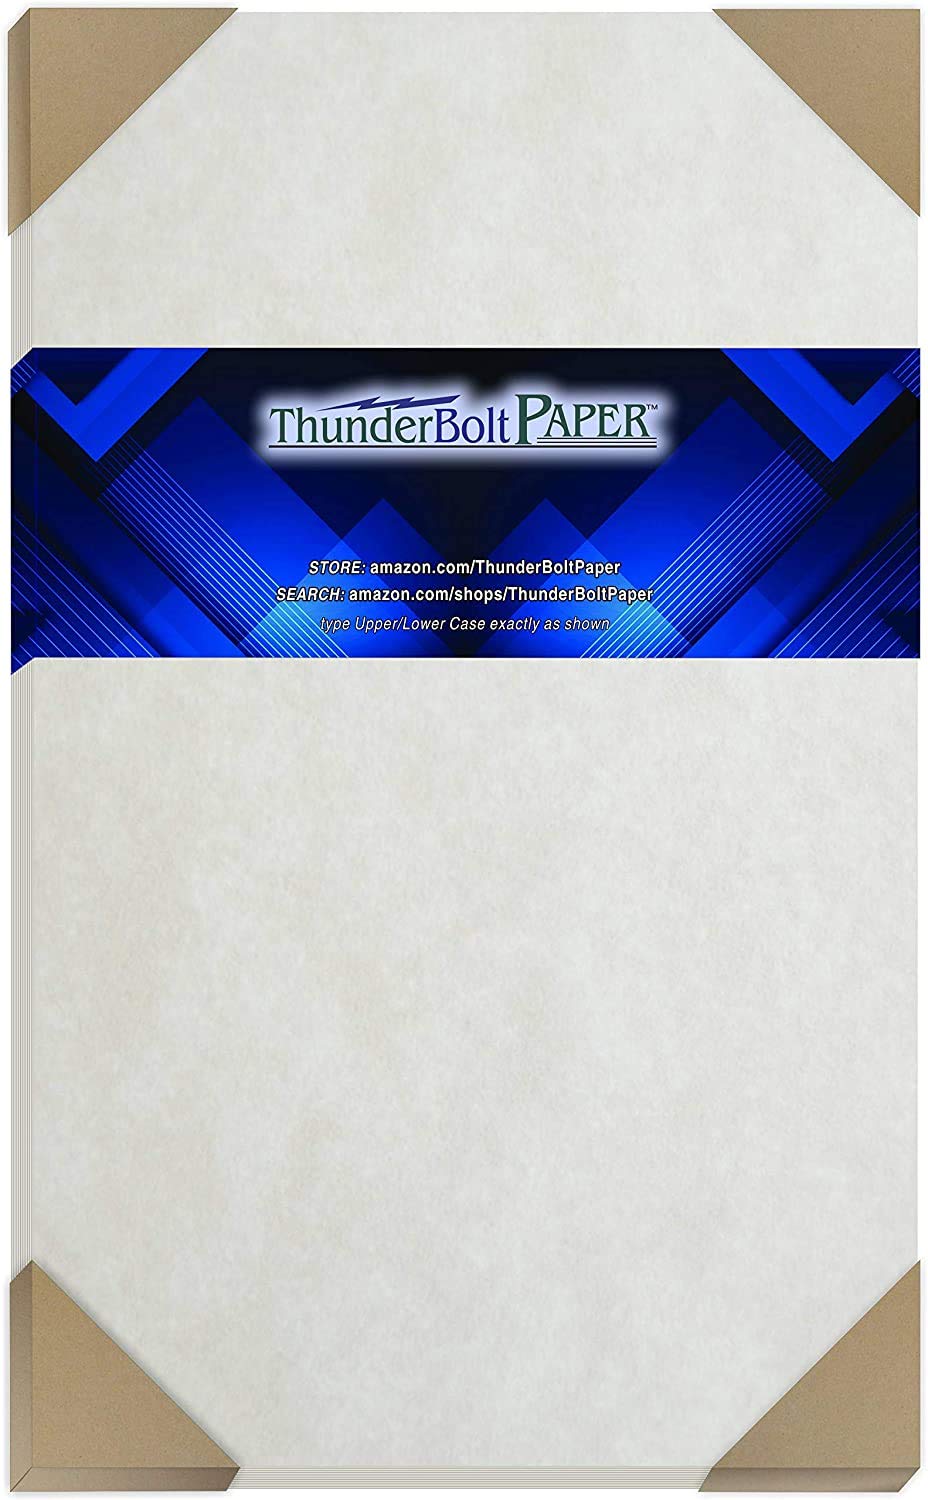 100 Sheets of Parchment Paper for Writting printing,Old Looking Vintage  Design Stationery Vintage Letter Writting Paper for